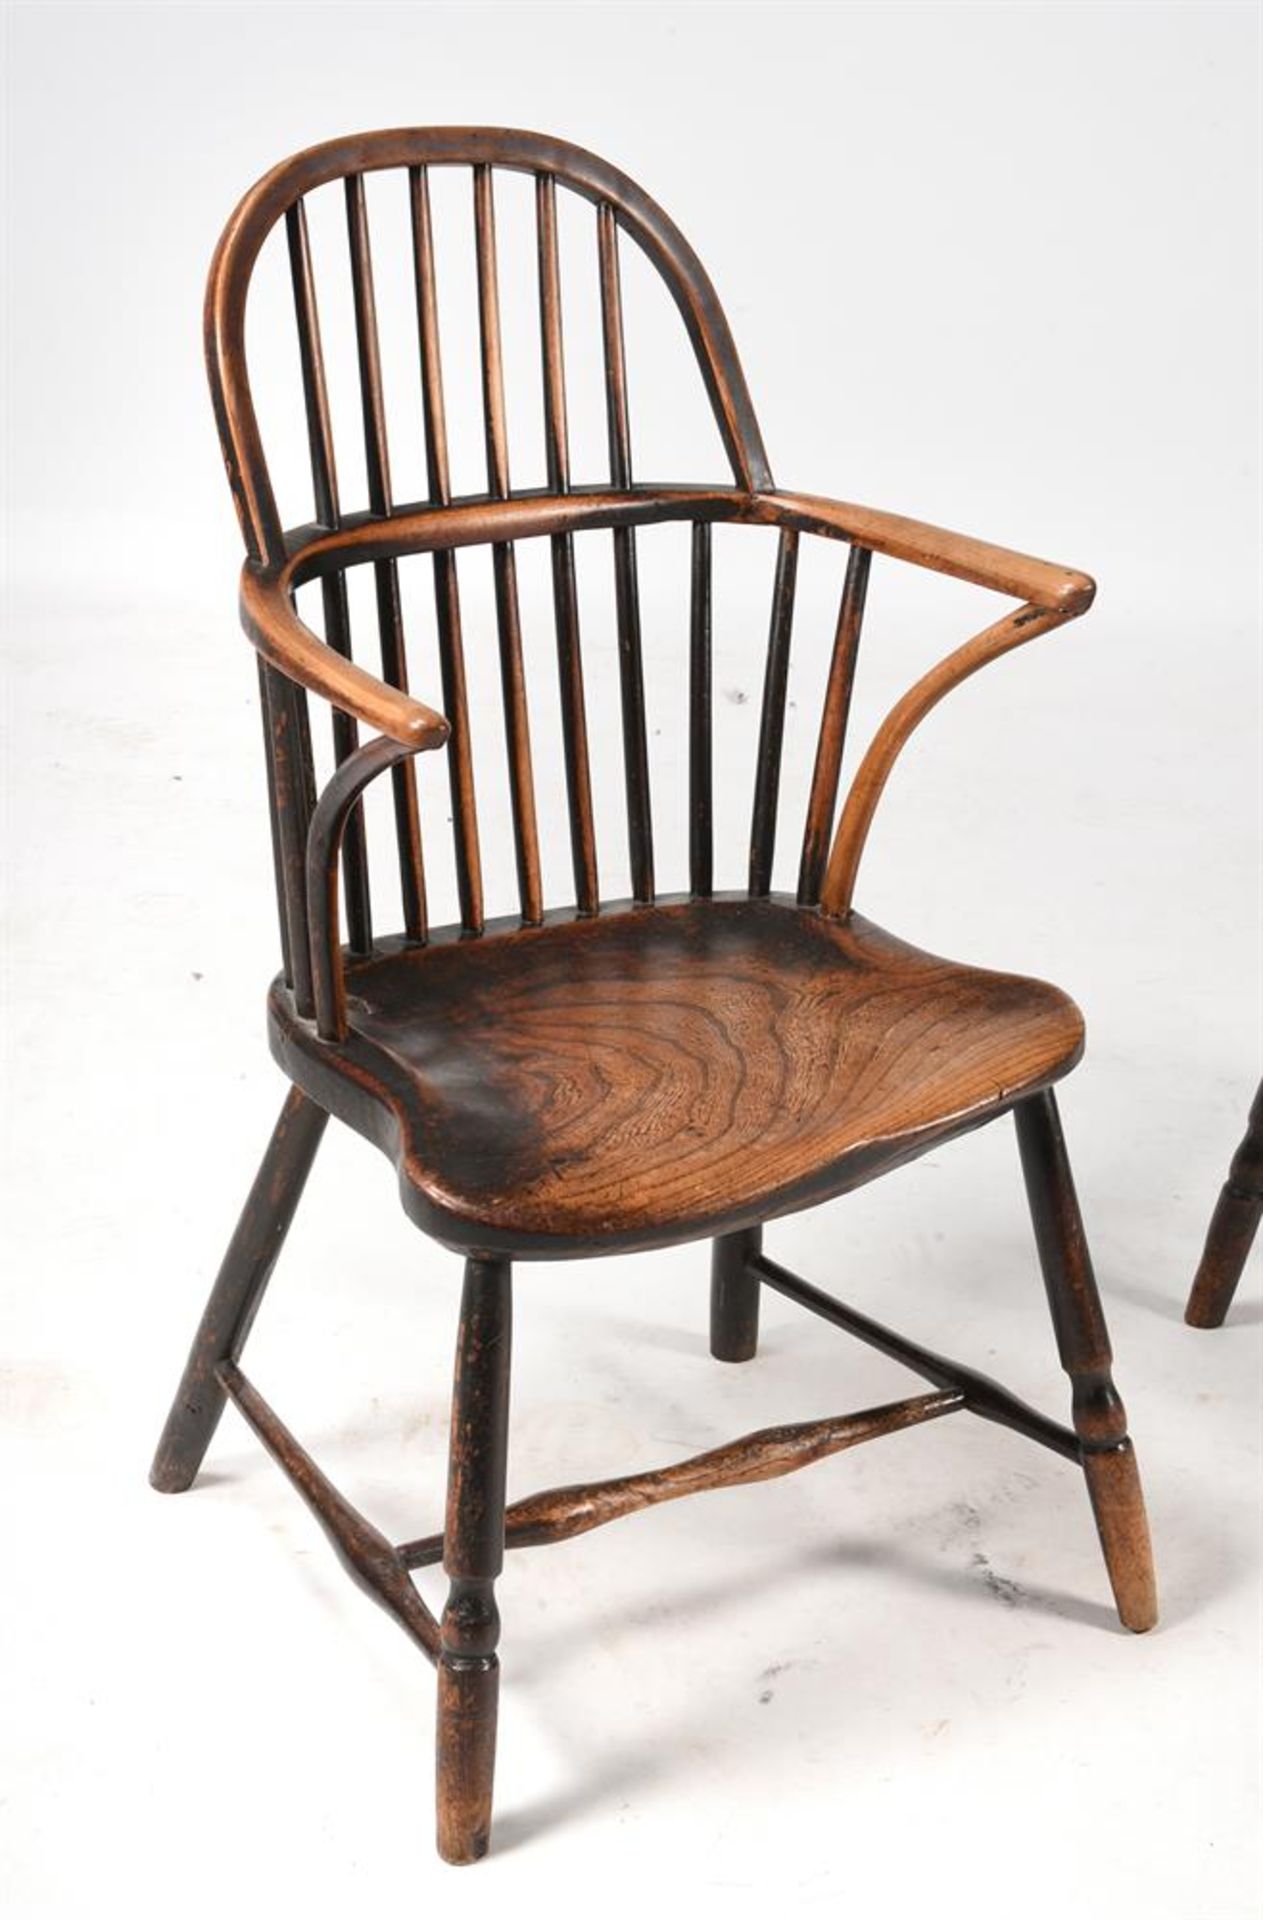 A PAIR OF FRUITWOOD, ASH AND ELM WINDSOR ARMCHAIRS, LATE 18TH/EARLY 19TH CENTURY - Image 4 of 6